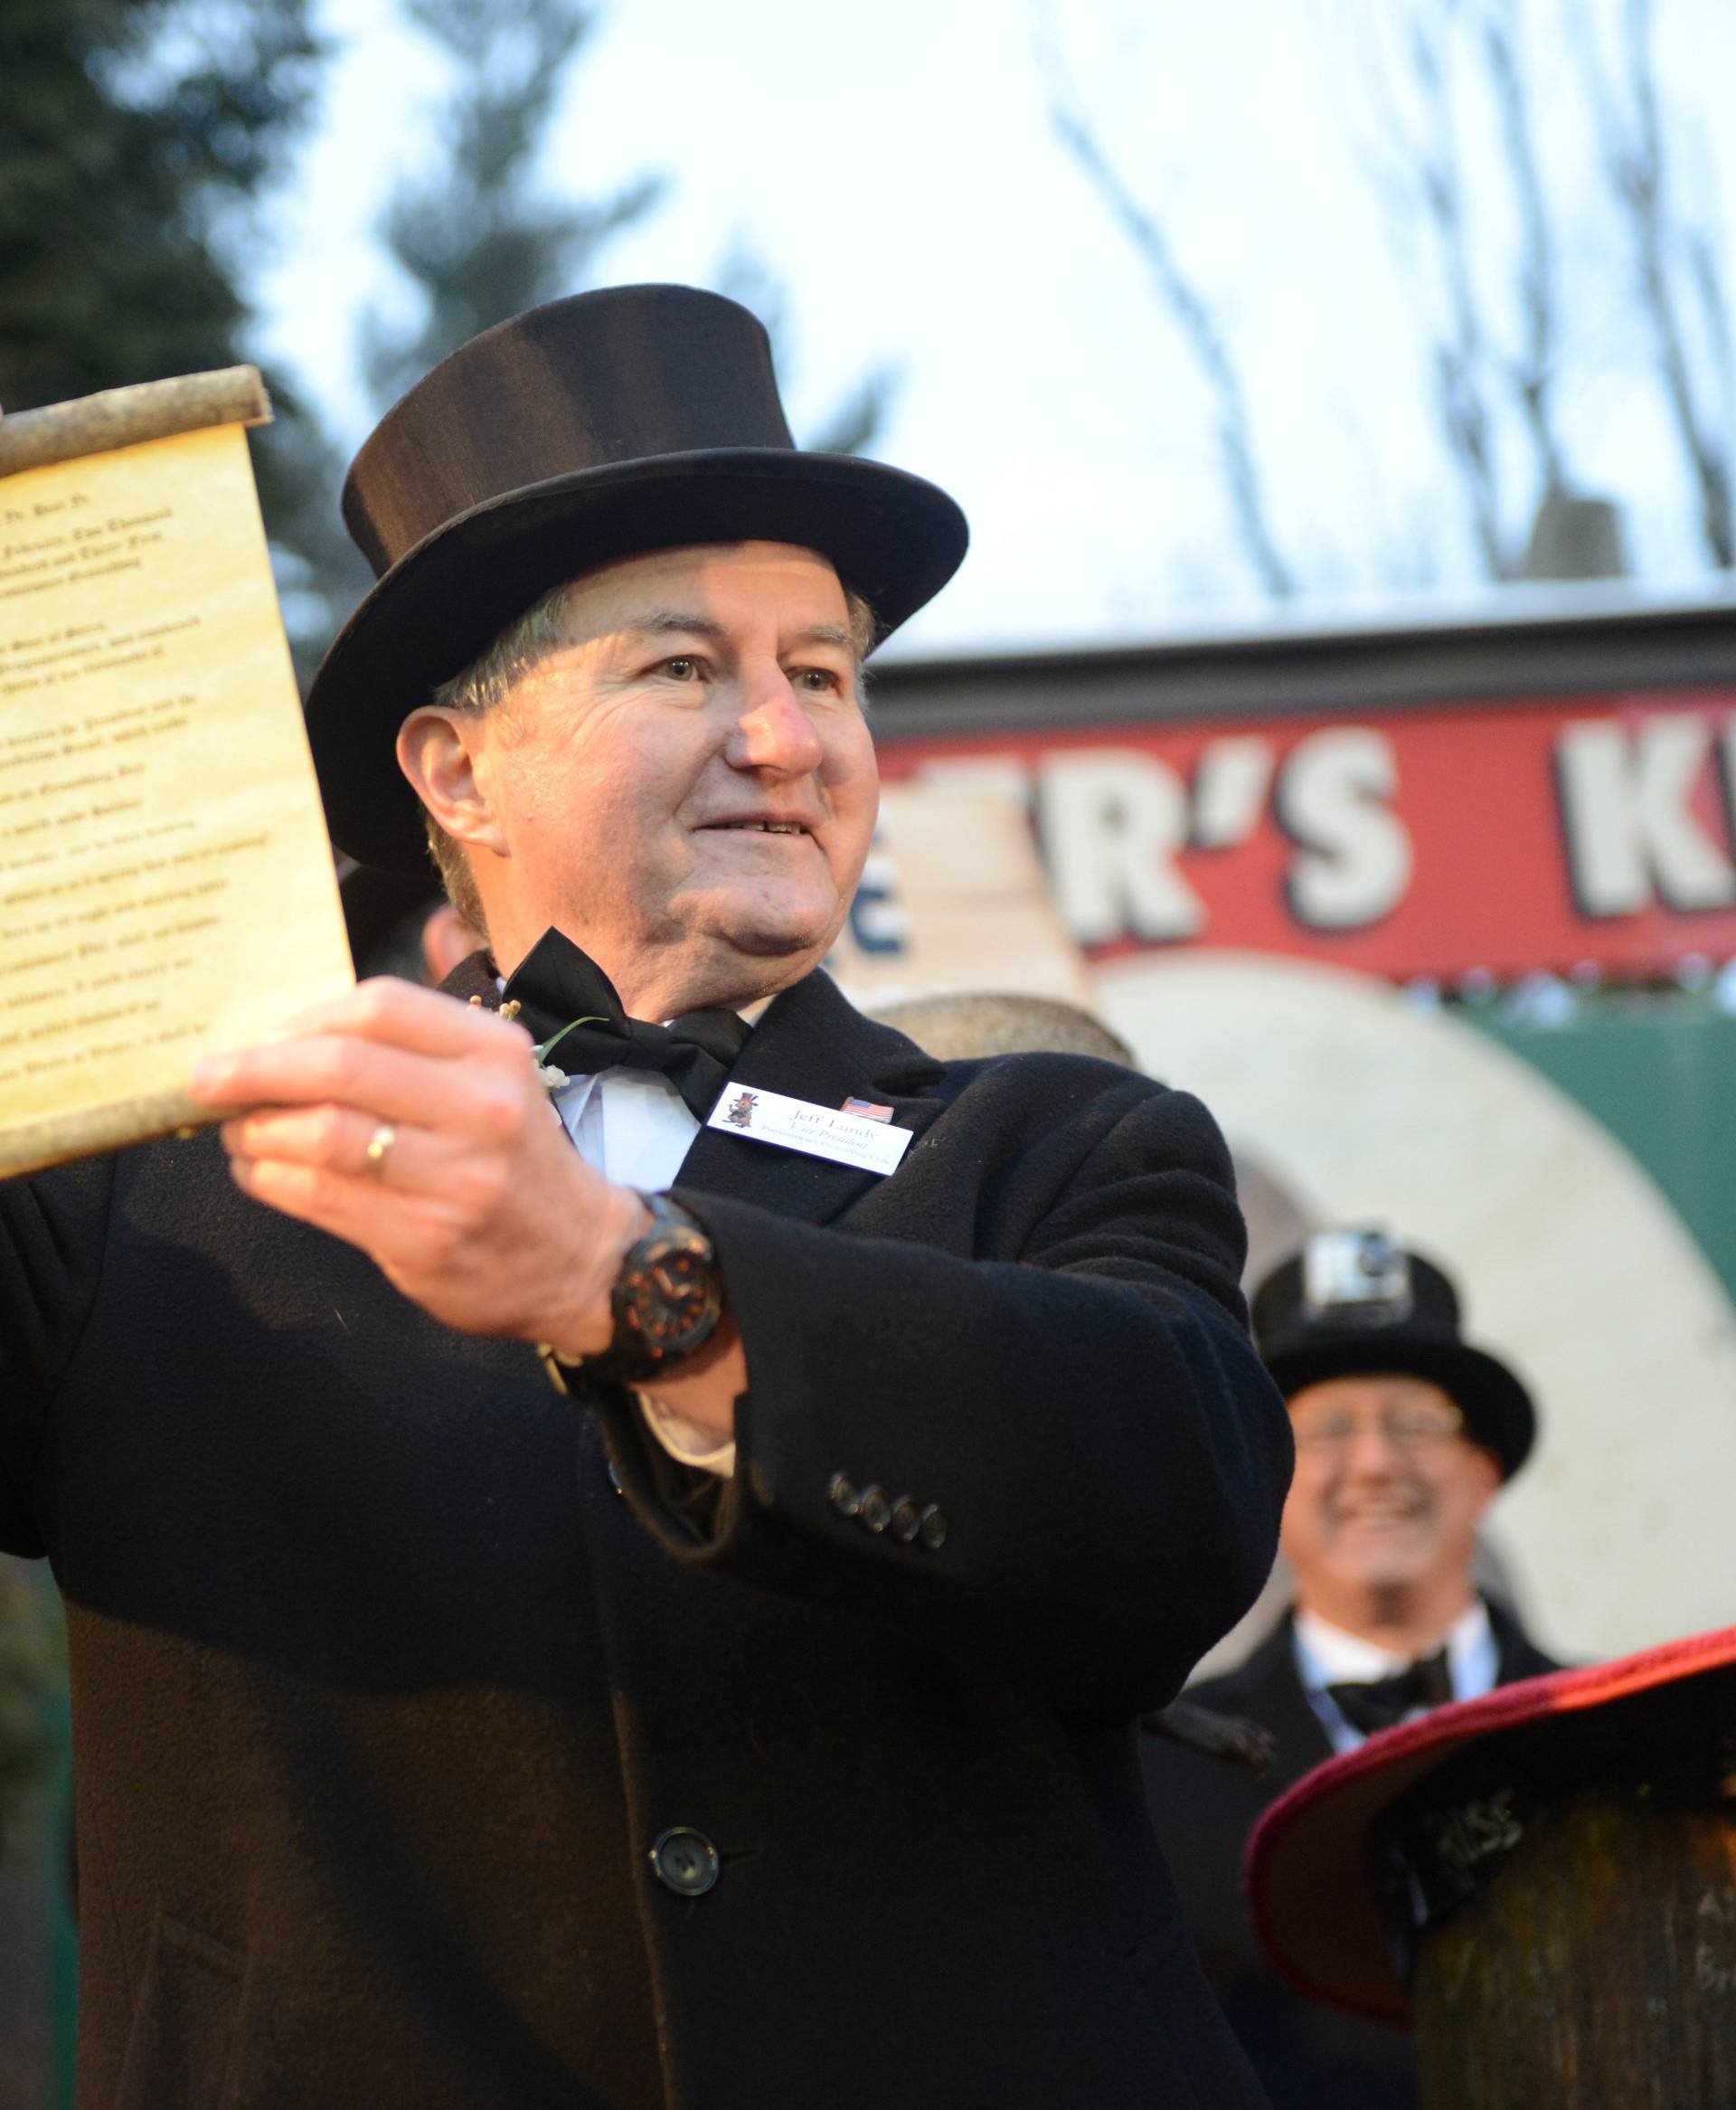 Inner Circle member Jeff Lundy holds a scroll with Punxsutawney Phil's forecast on Groundhog Day in Punxsutawney